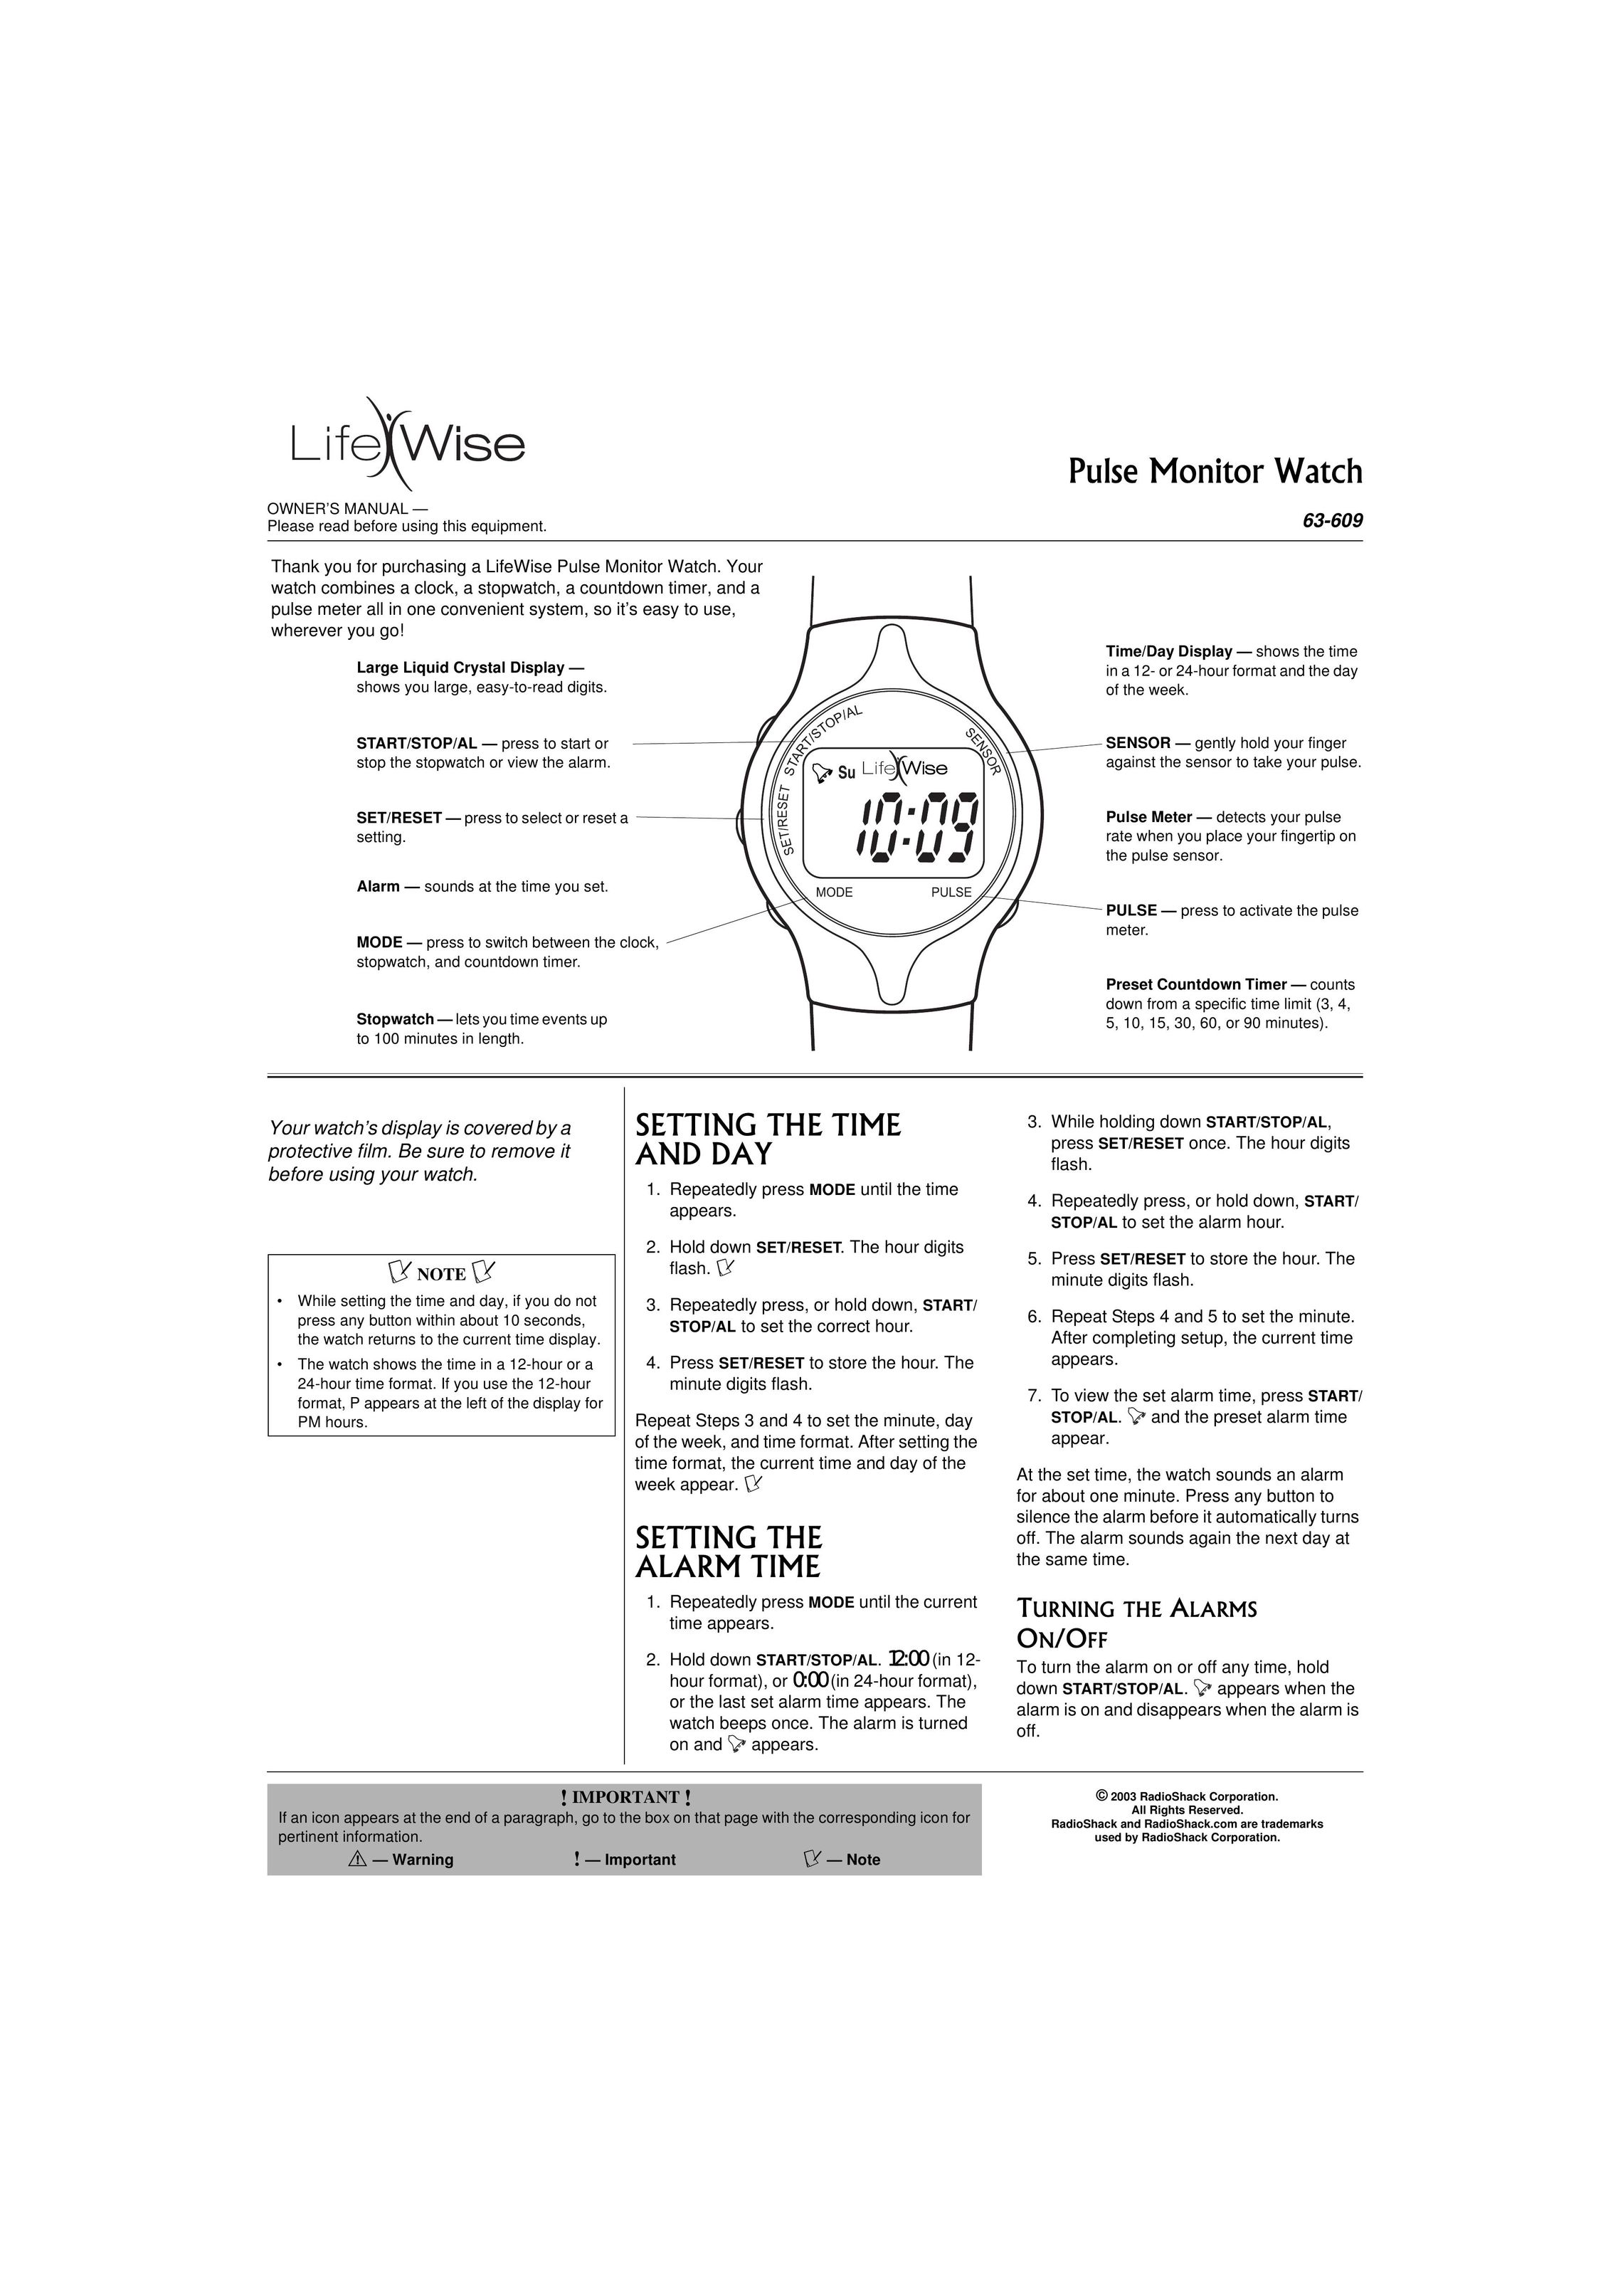 LifeWise 63-609 Heart Rate Monitor User Manual